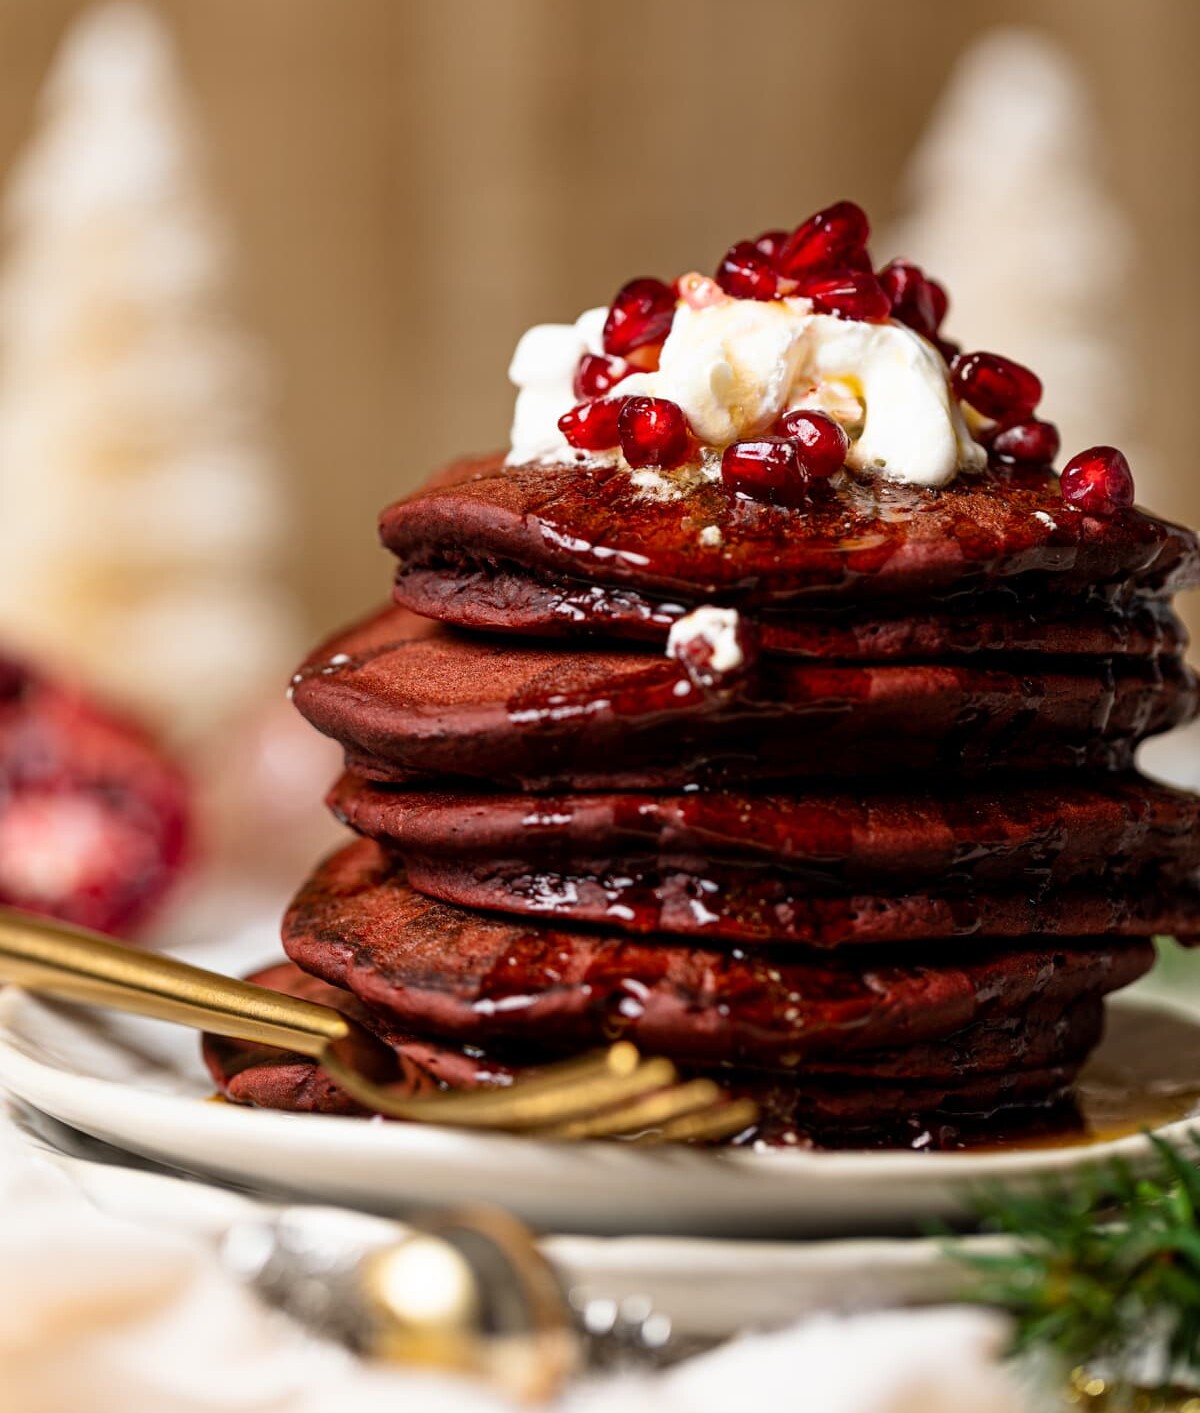 Stack of Fluffy Red Velvet Pancakes topped with whipped cream and pomegranate seeds